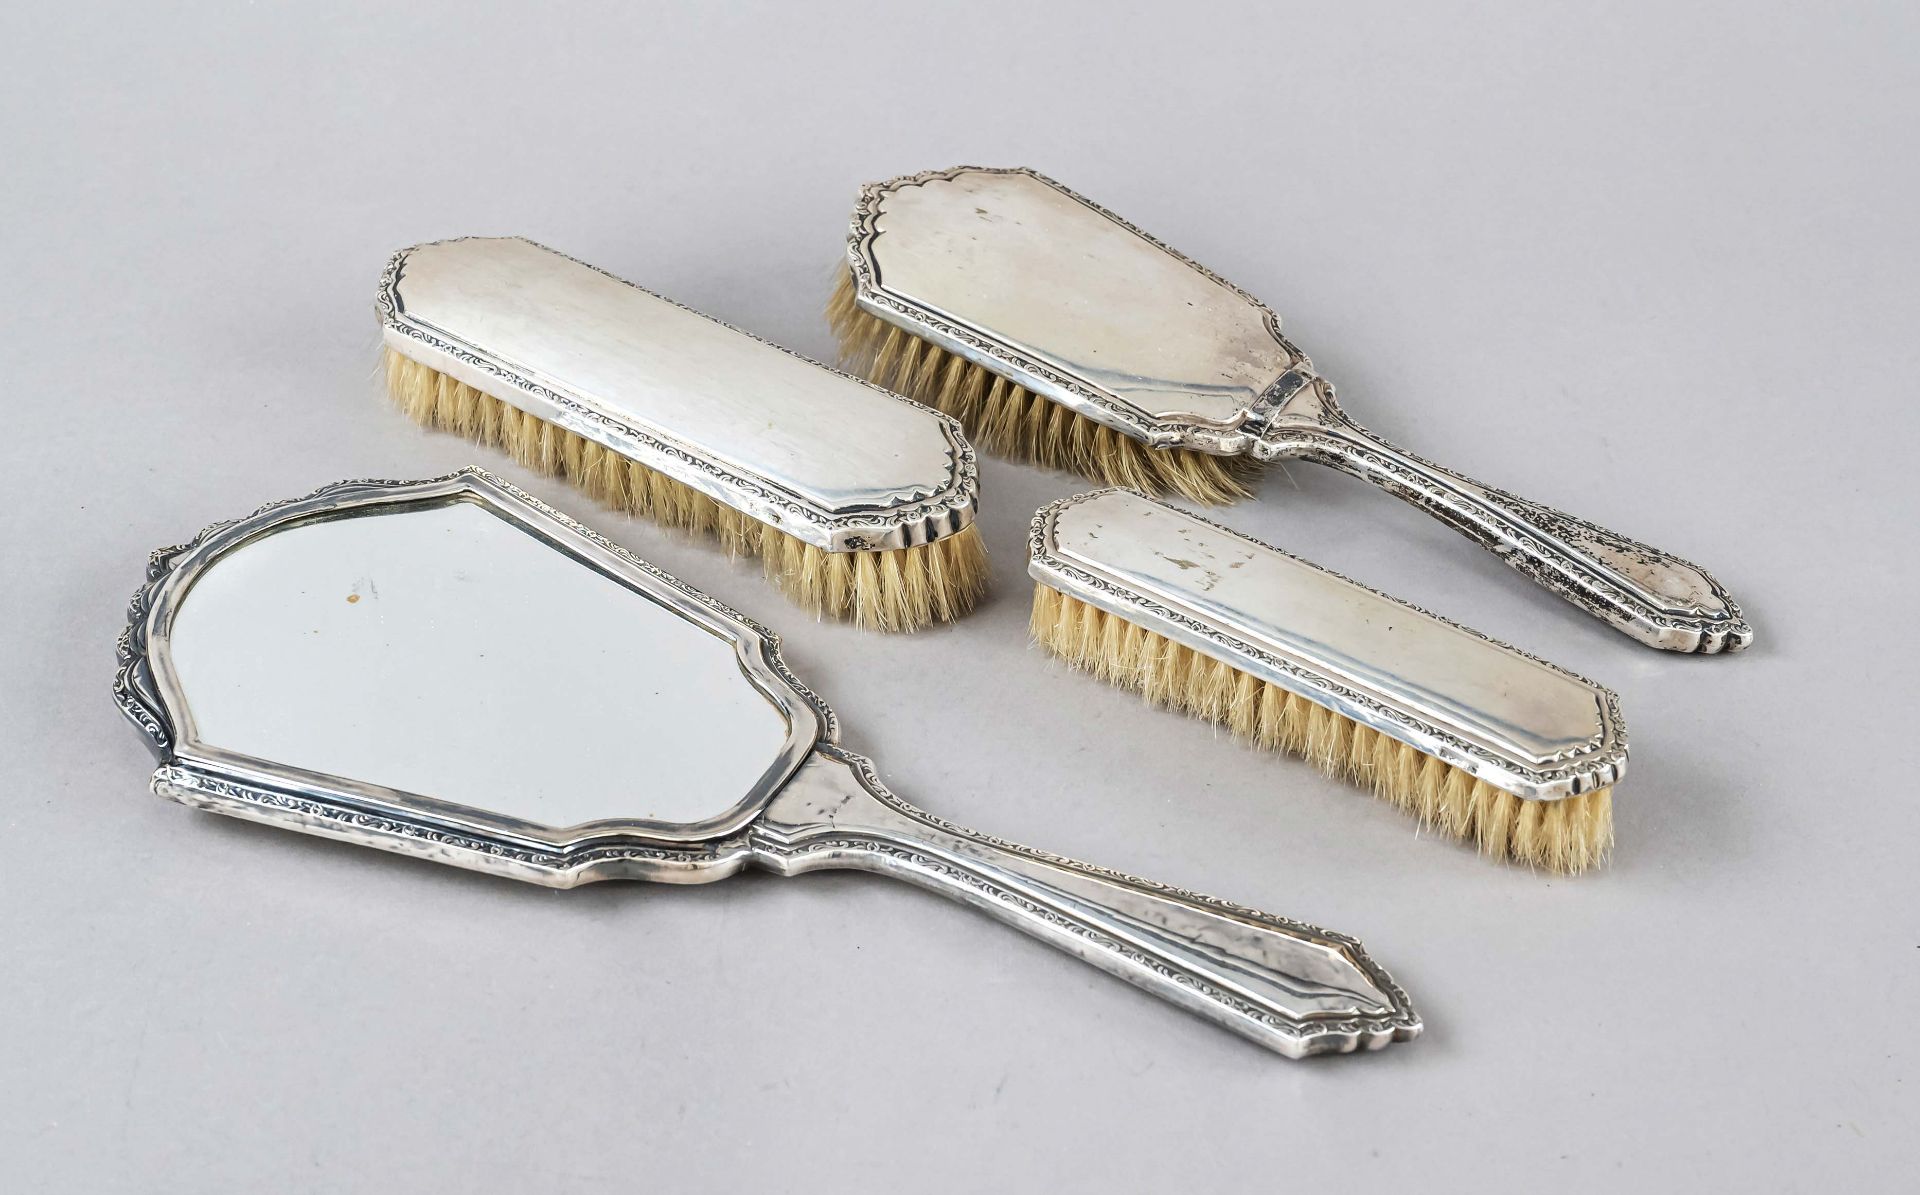 Four-piece hairdressing set, early 20th c., silver 800/000, each with relief decor rim, 3 brushes